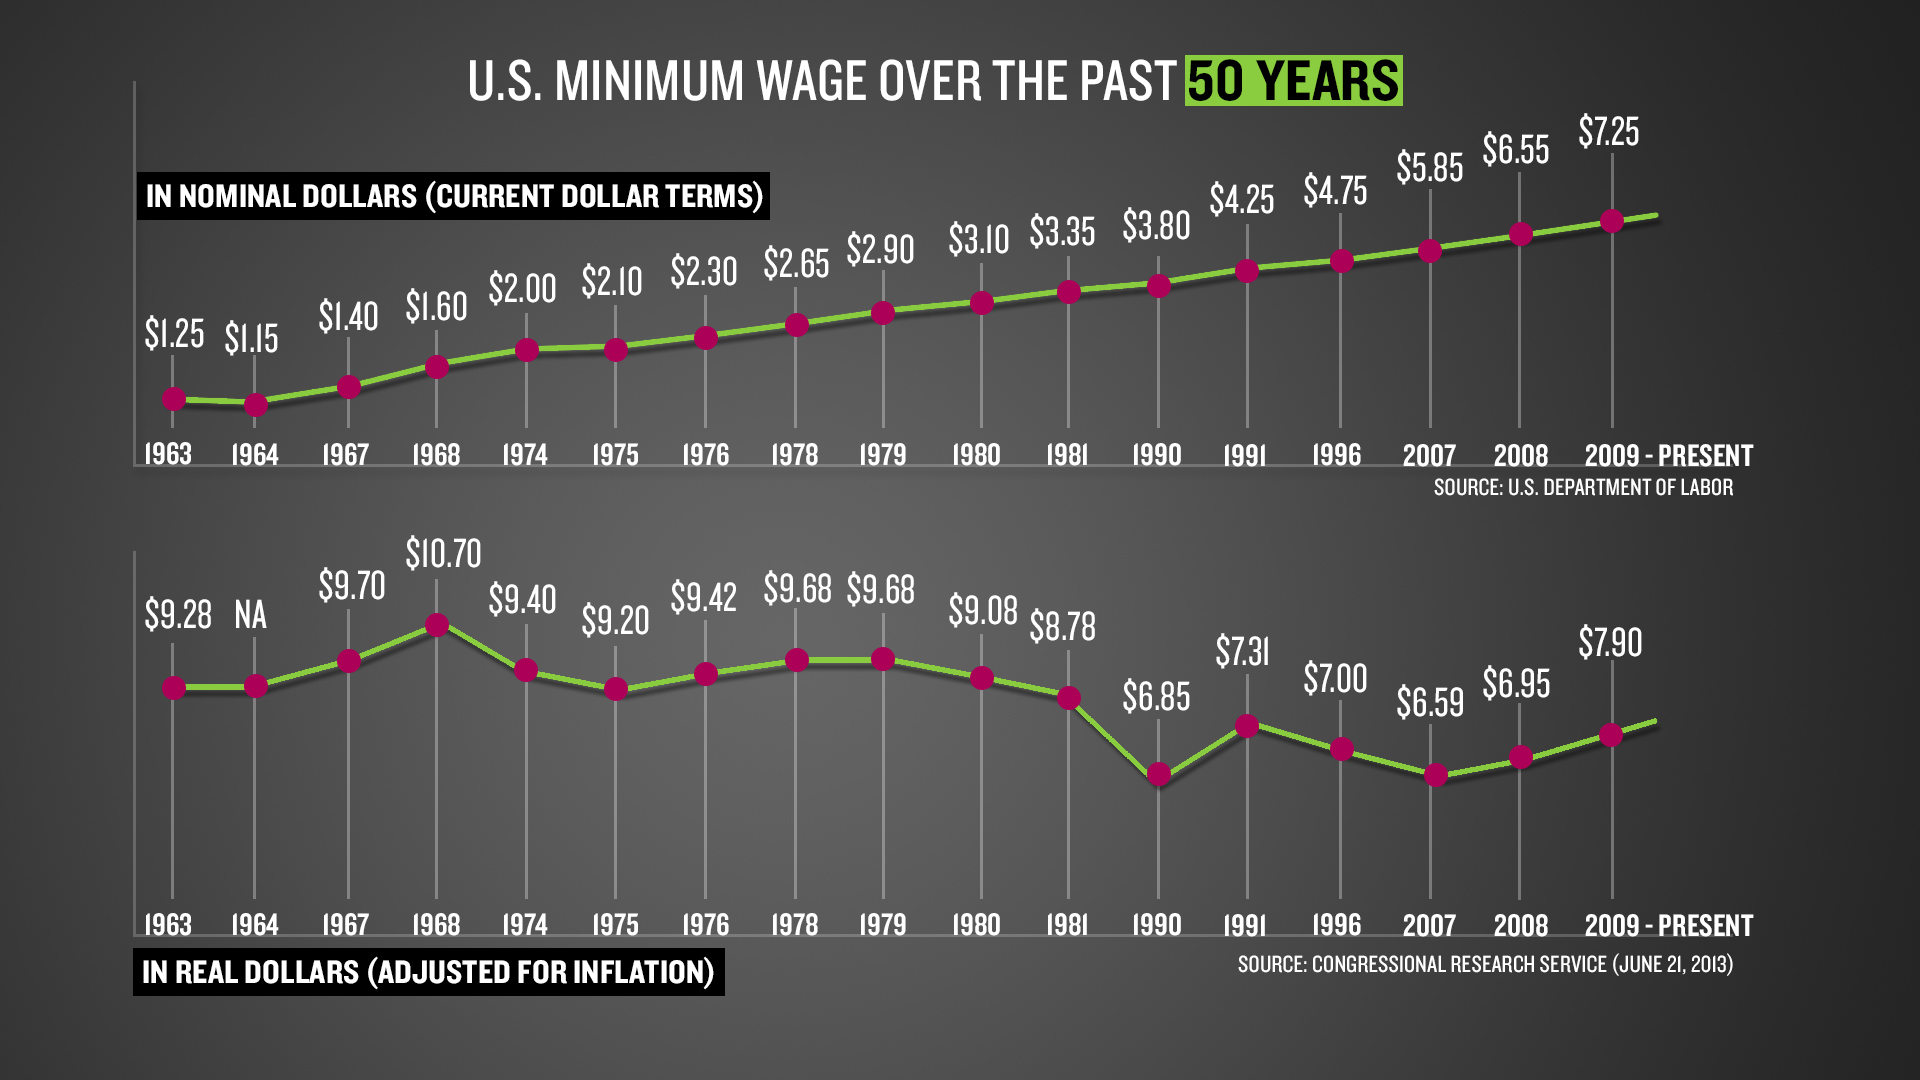 Should there be a minimum wage